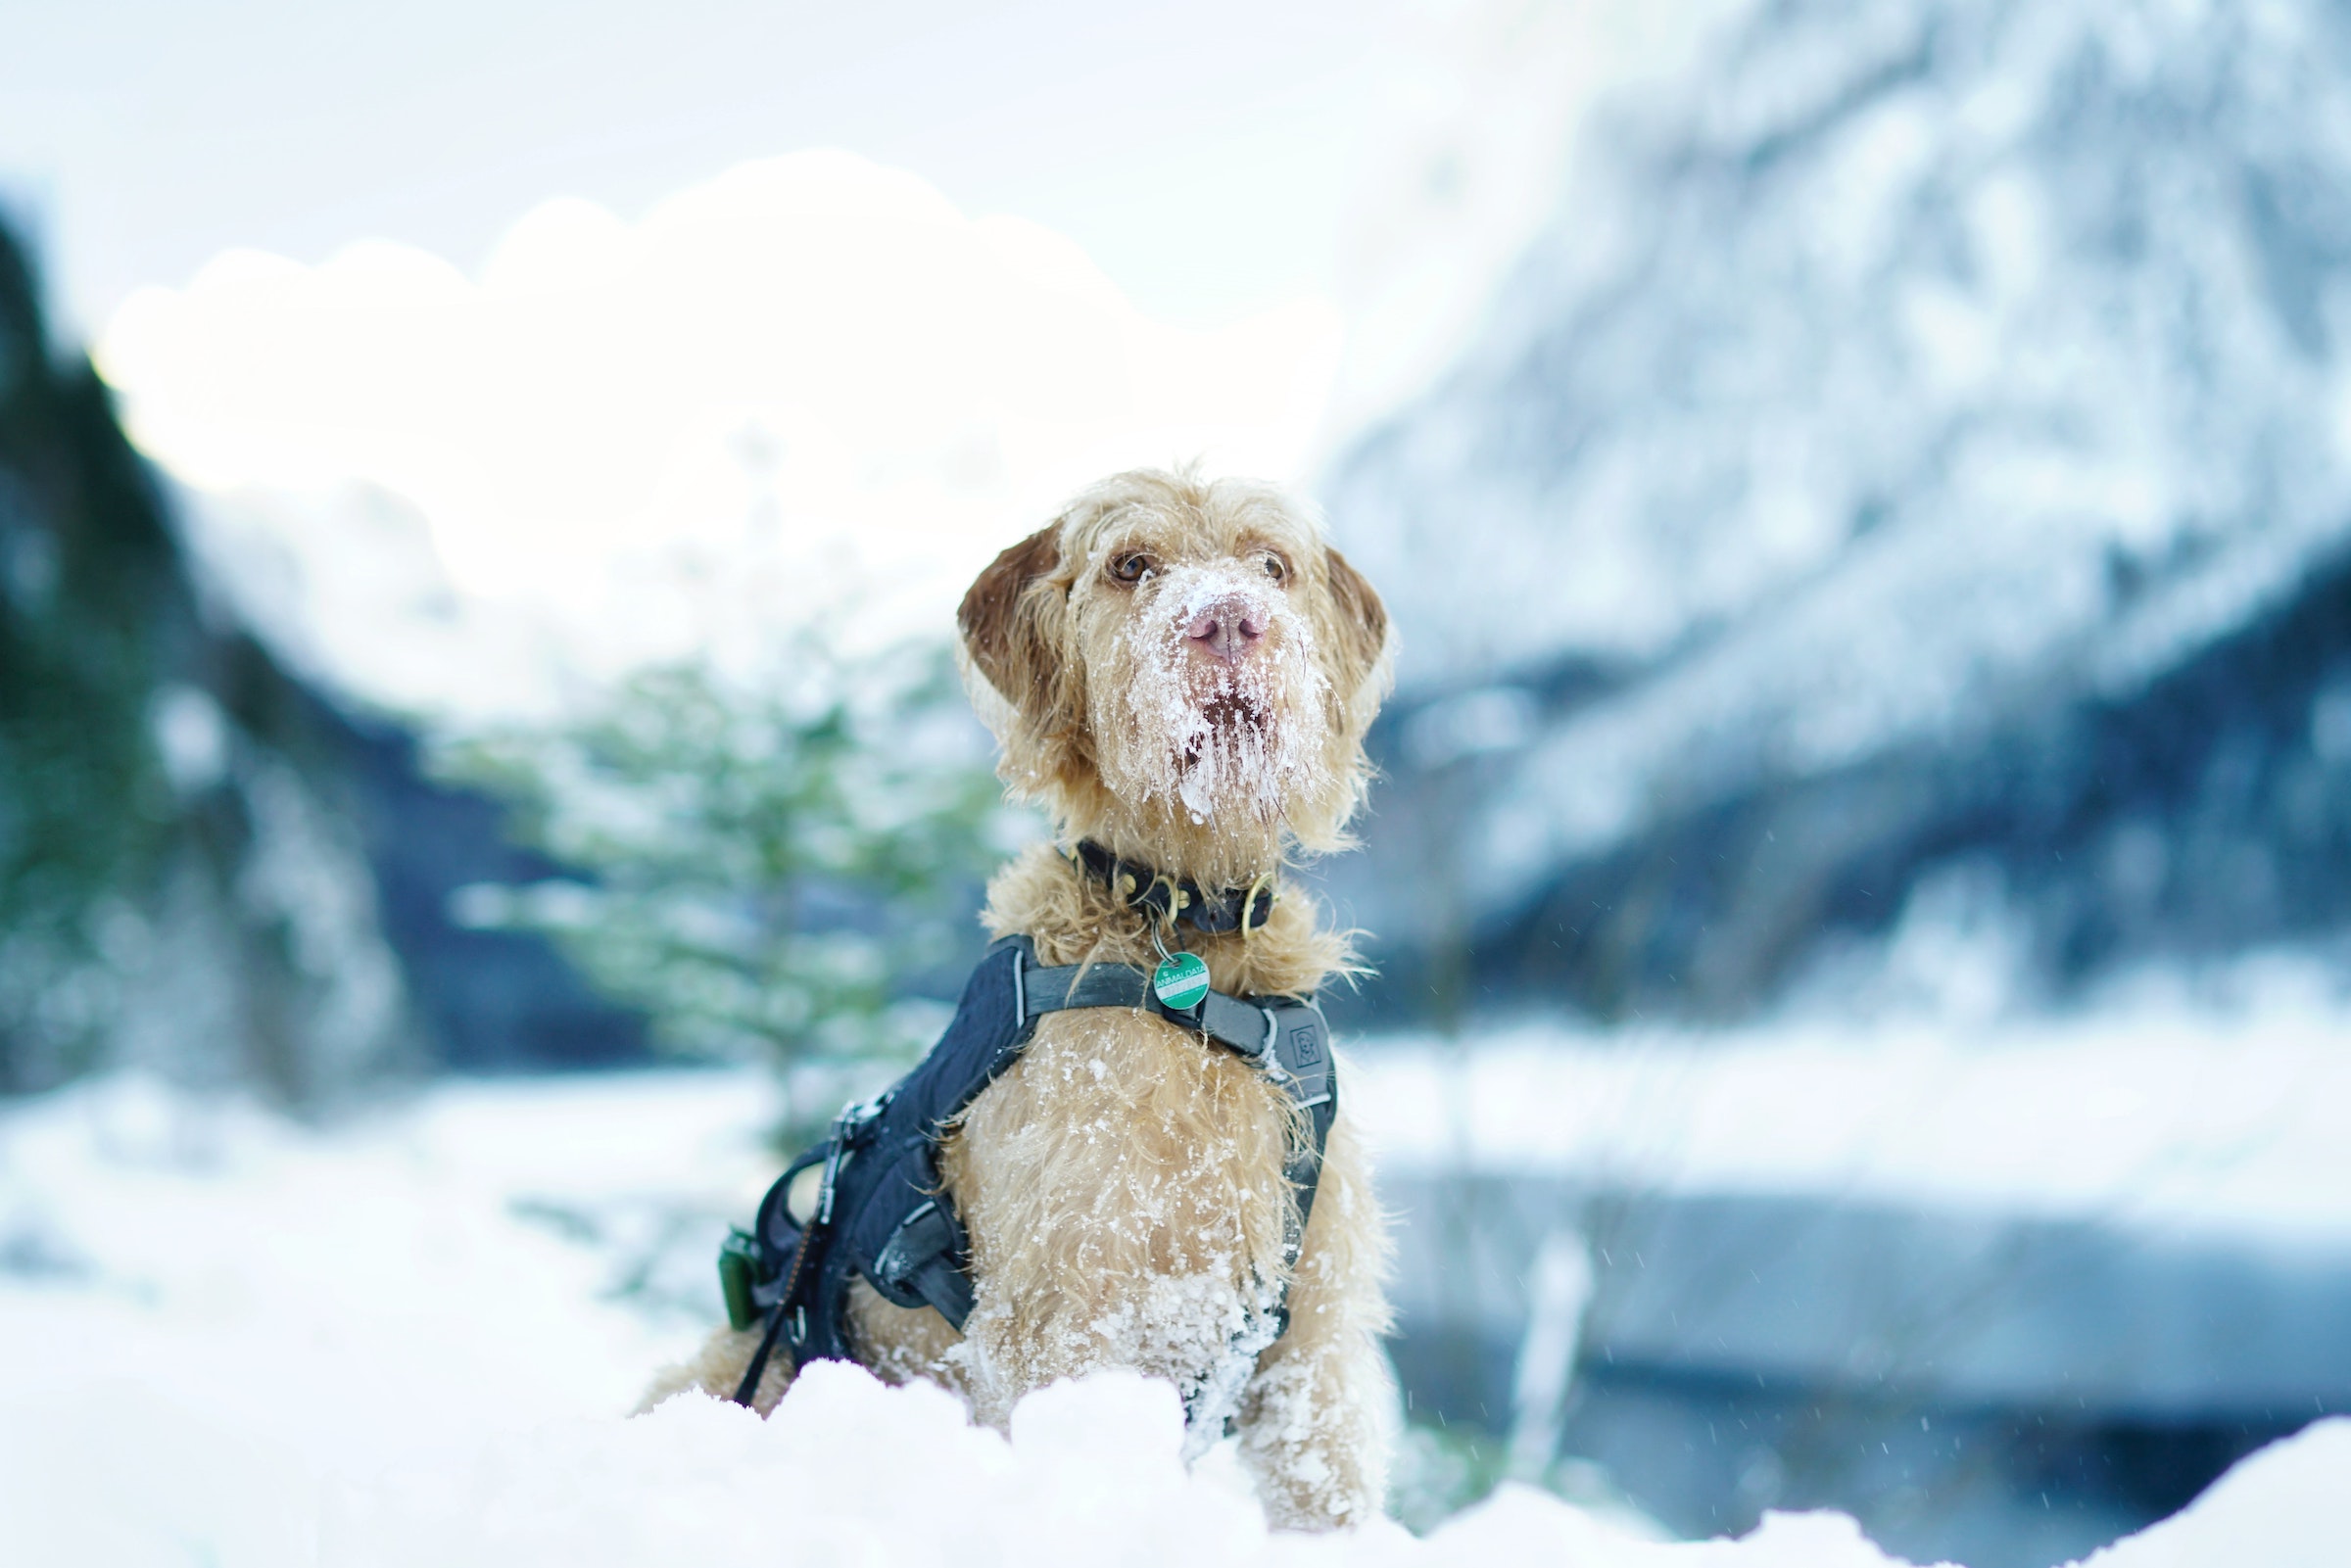 A long-coated beige dog wearing a harness and with snow on his snout stands in the snow in front of a mountain landscape